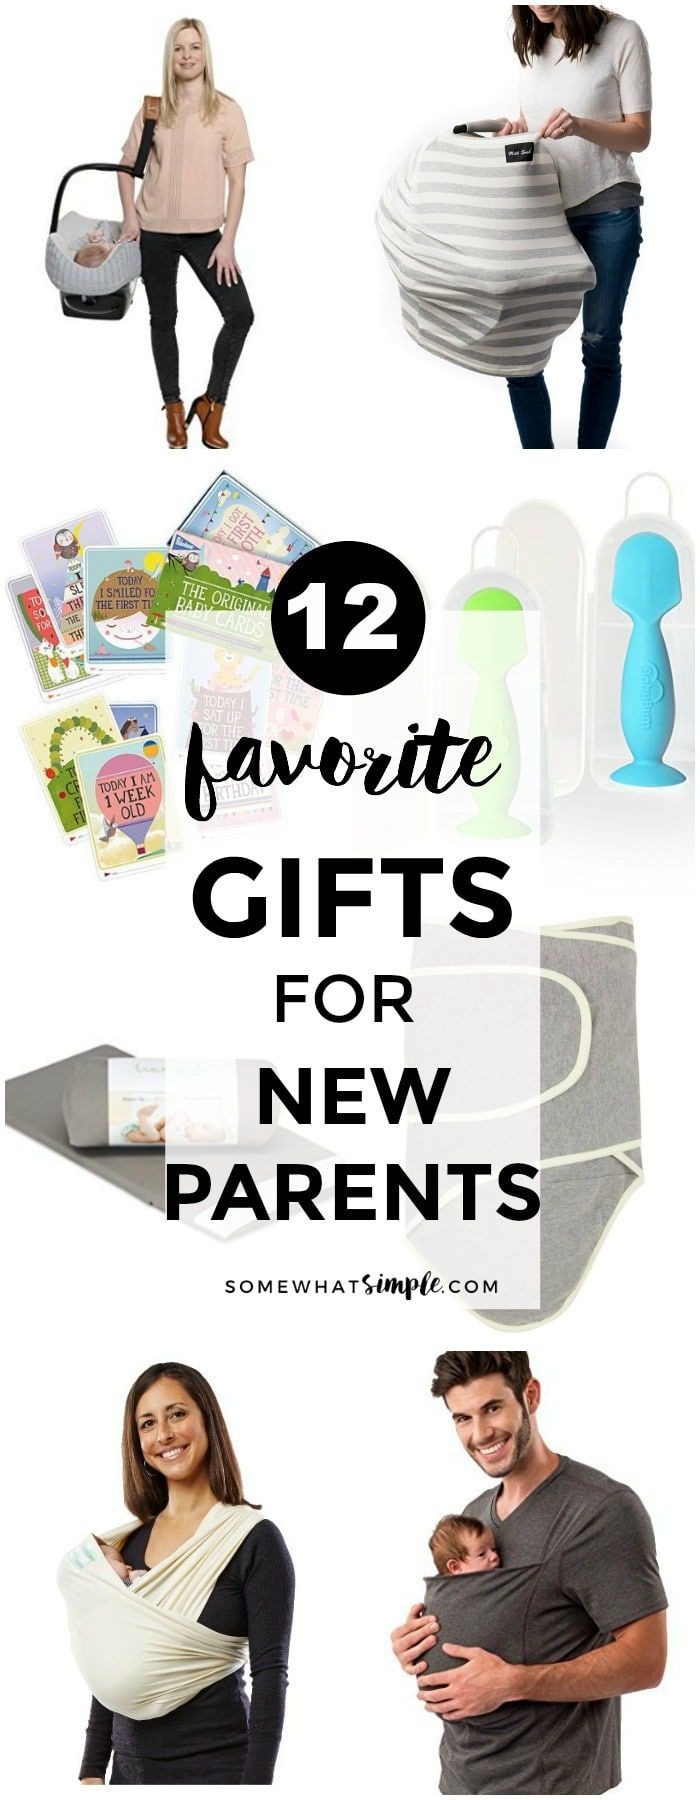 Gift Ideas For Someone Who Just Had A Baby
 Best 25 Gifts for expecting parents ideas on Pinterest